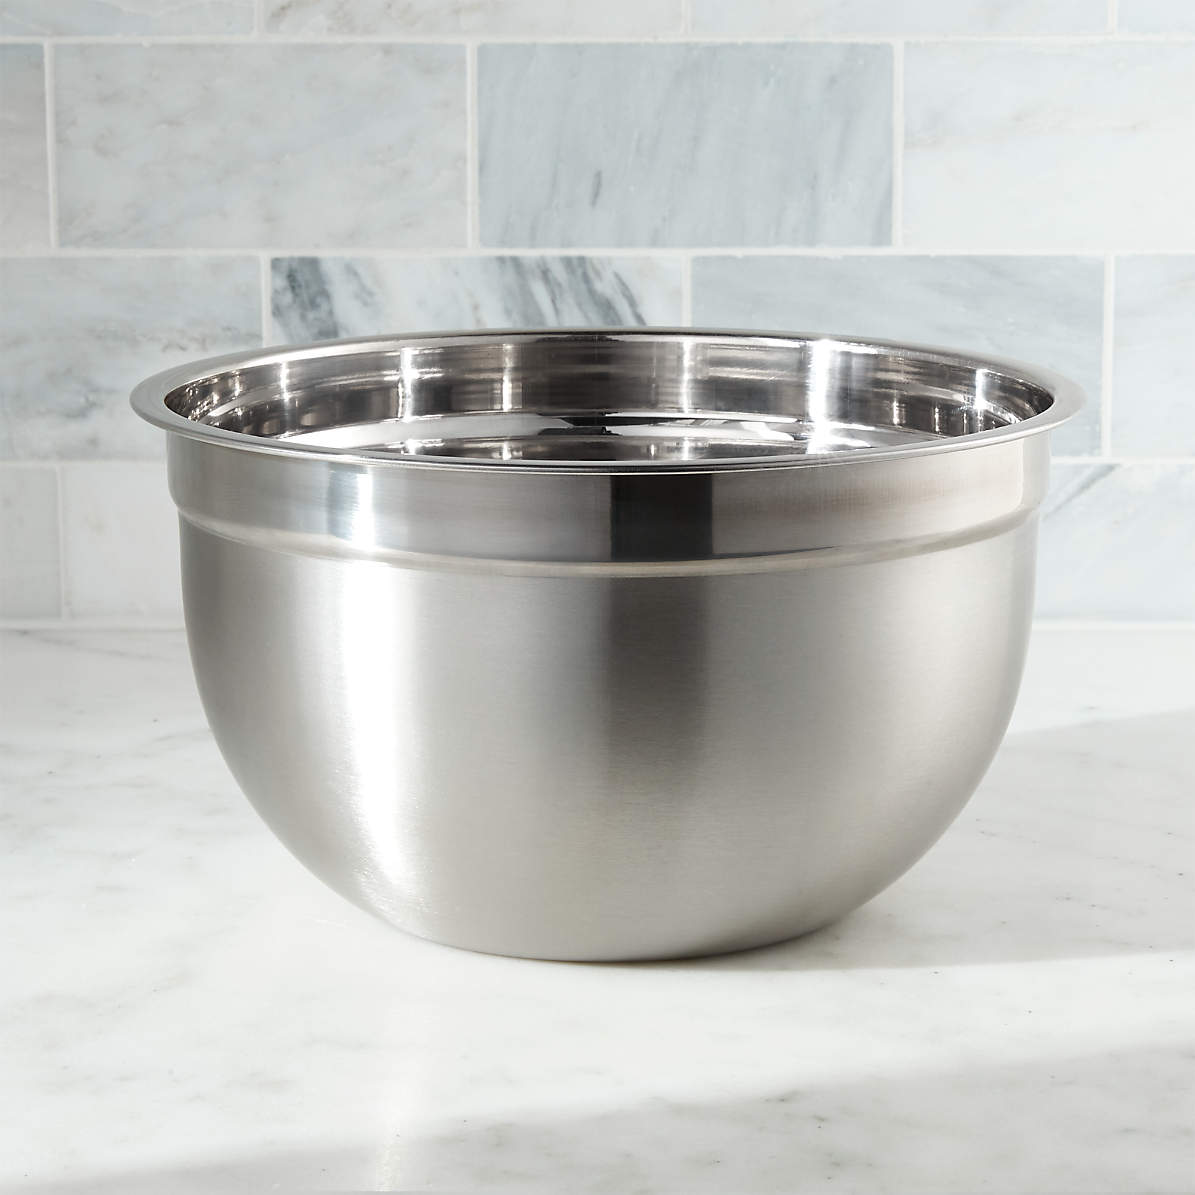 Stainless Steel 5-Quart Bowl | Crate & Barrel